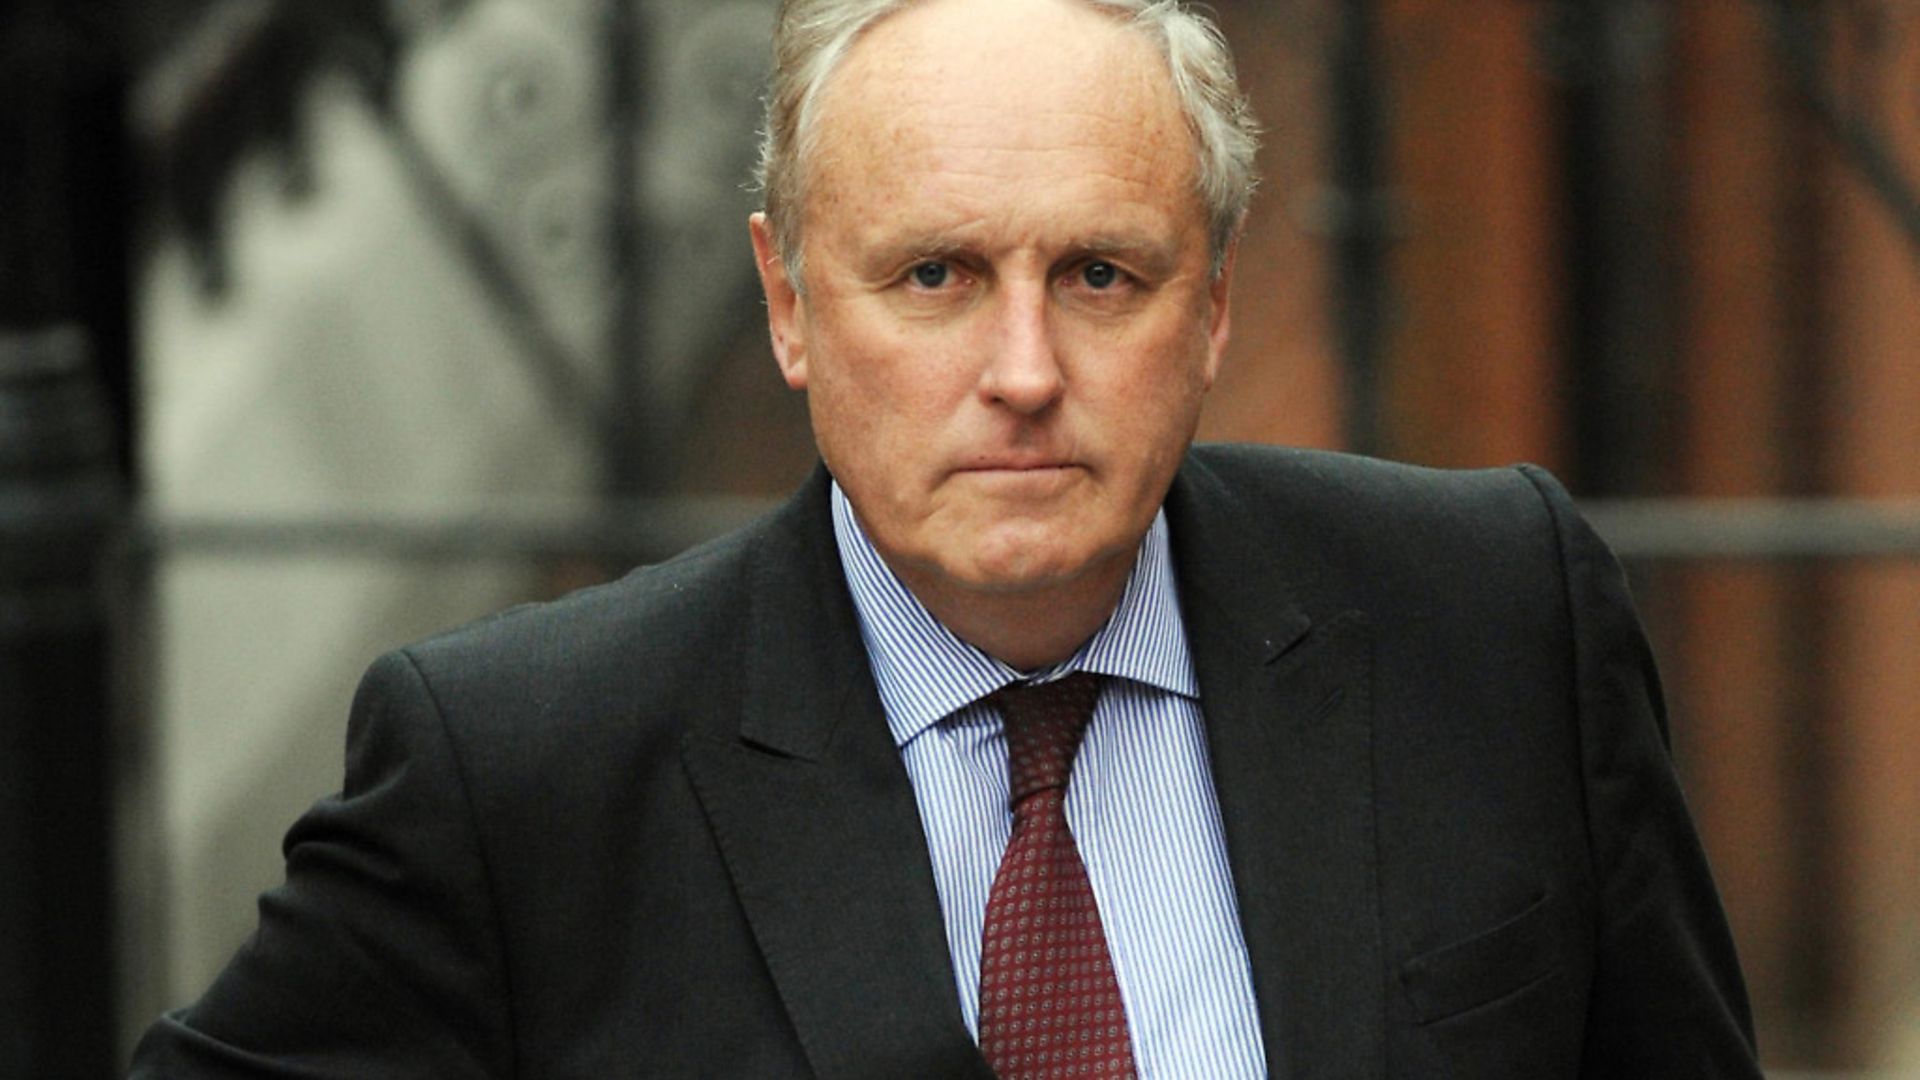 Former Daily Mail editor Paul Dacre. Picture: PA/Stefan Rousseau - Credit: PA Archive/PA Images